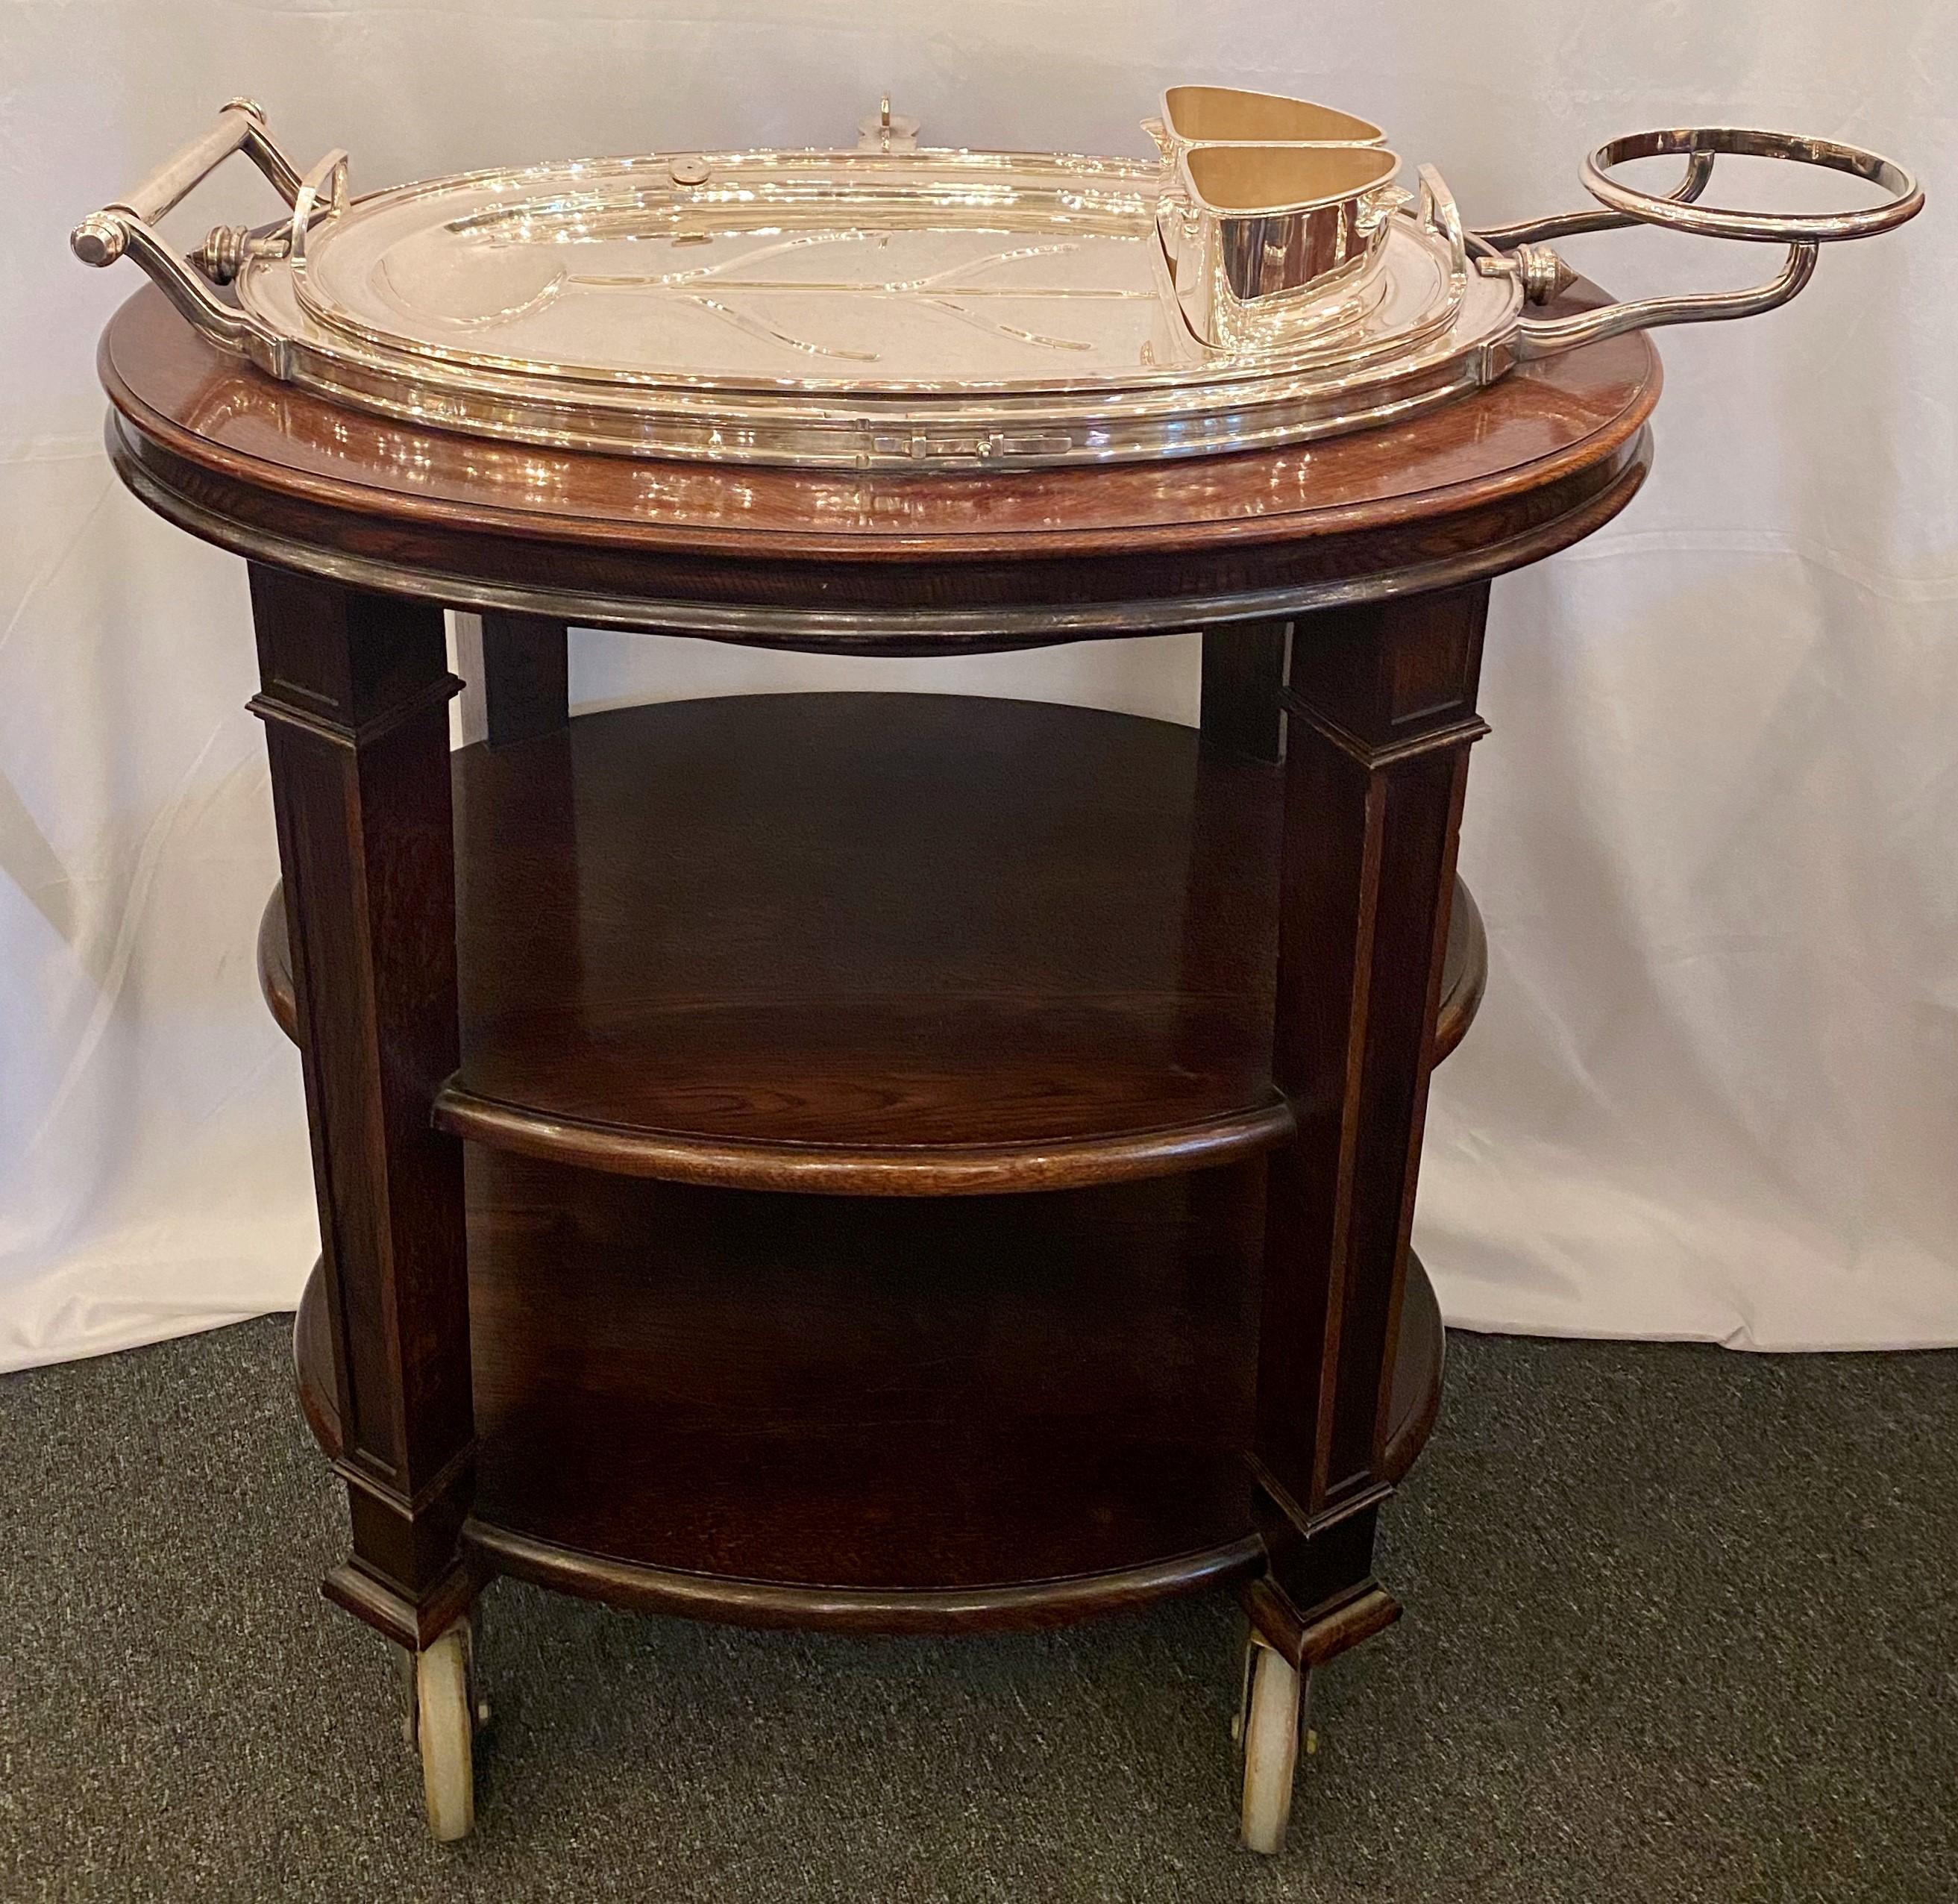 20th Century Estate English Sheffield Silver Mahogany Carving Trolley on Casters, circa 1950